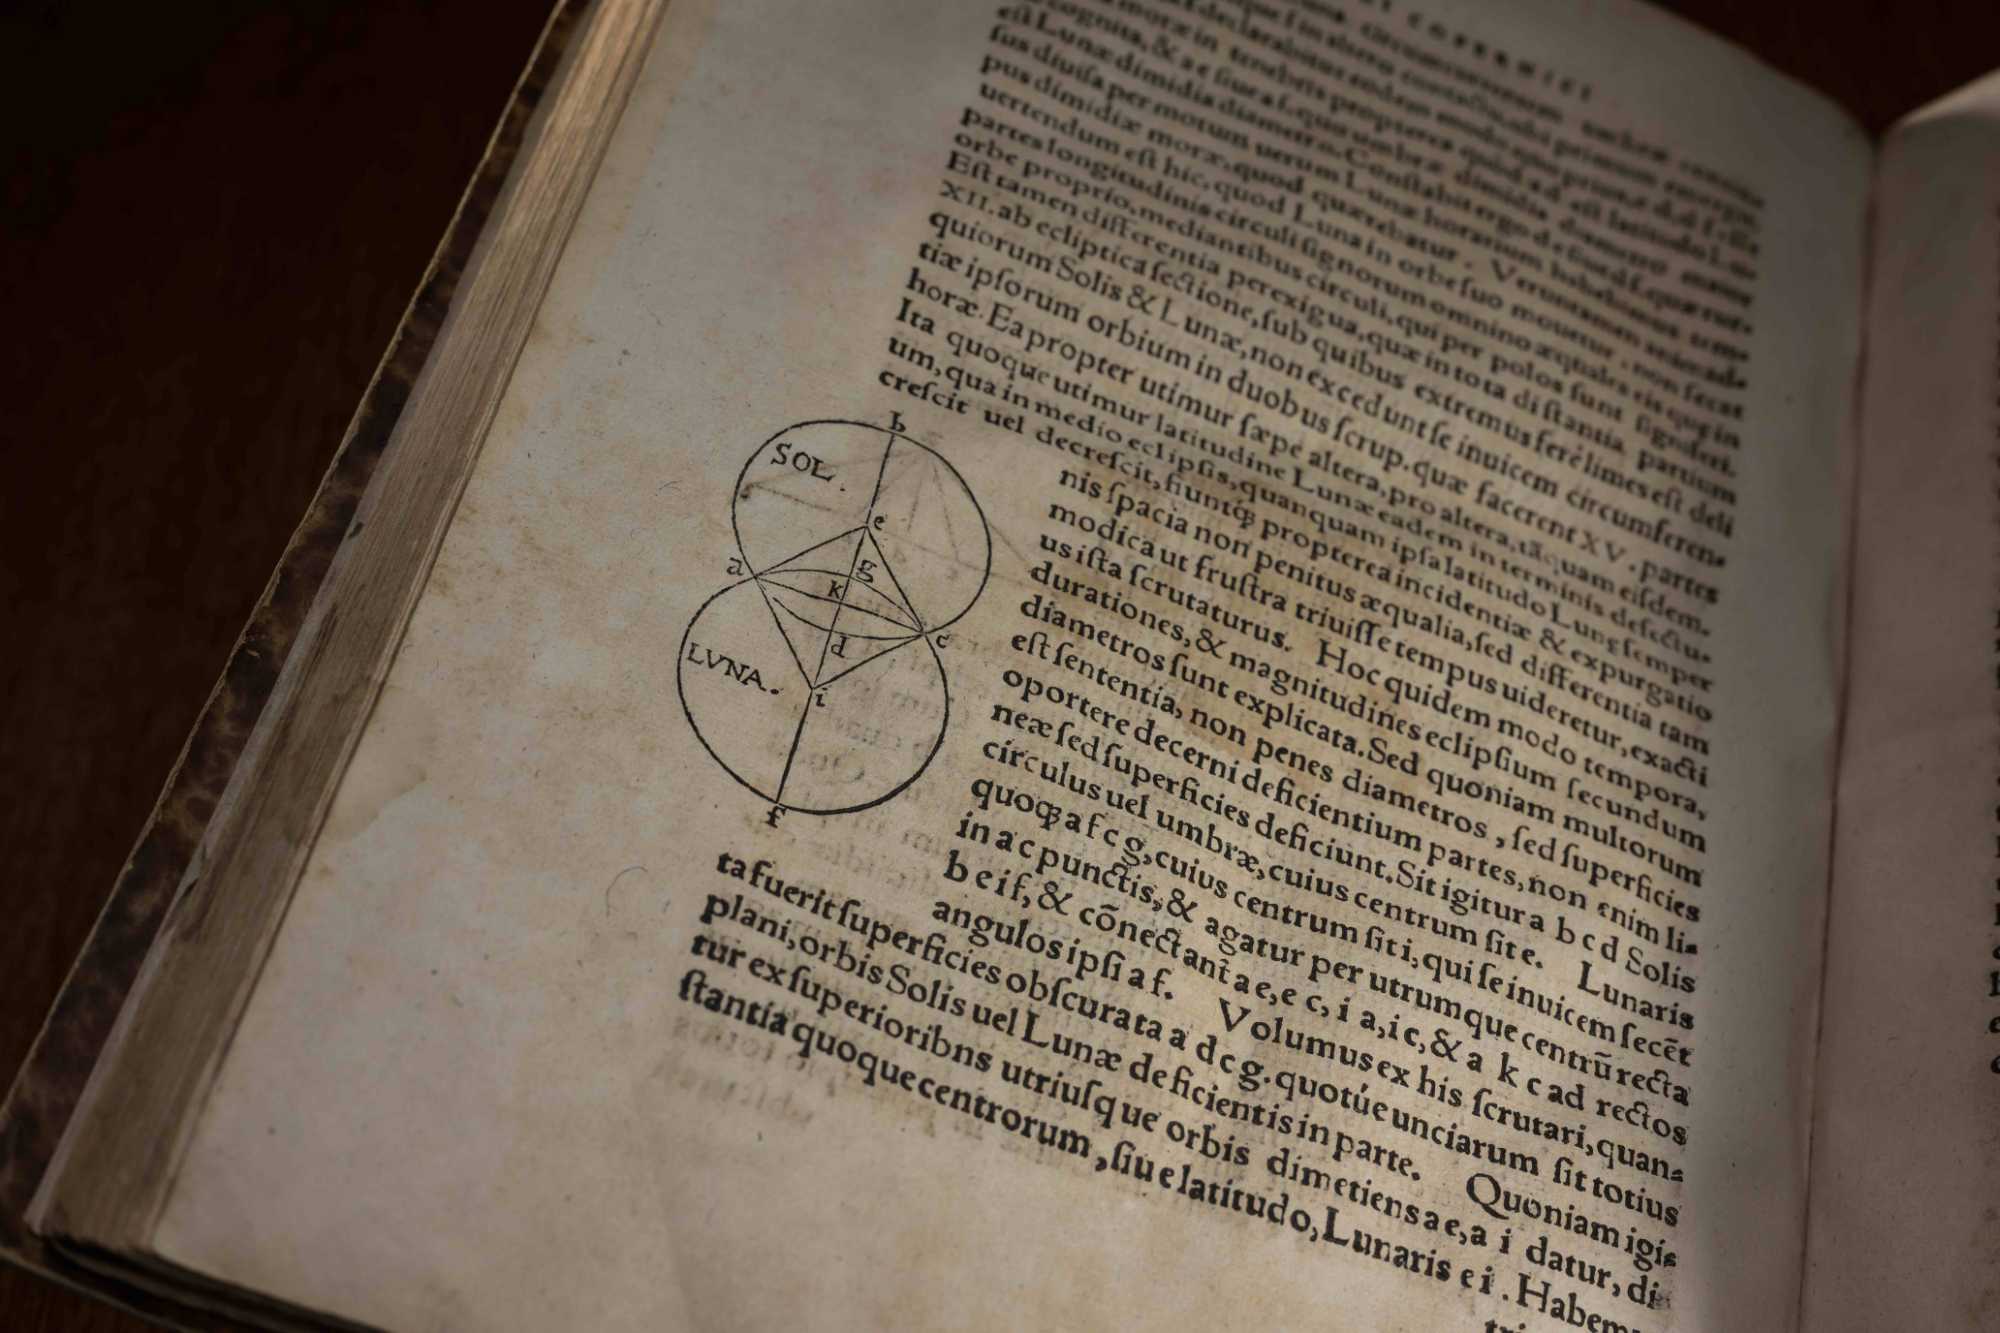 Close-up of a page from "De revolutionibus orbium coelestium" (English translation: On the Revolutions of the Heavenly Spheres) by Copernicus showing mathematical schematics of the relationship between the sun and the moon.